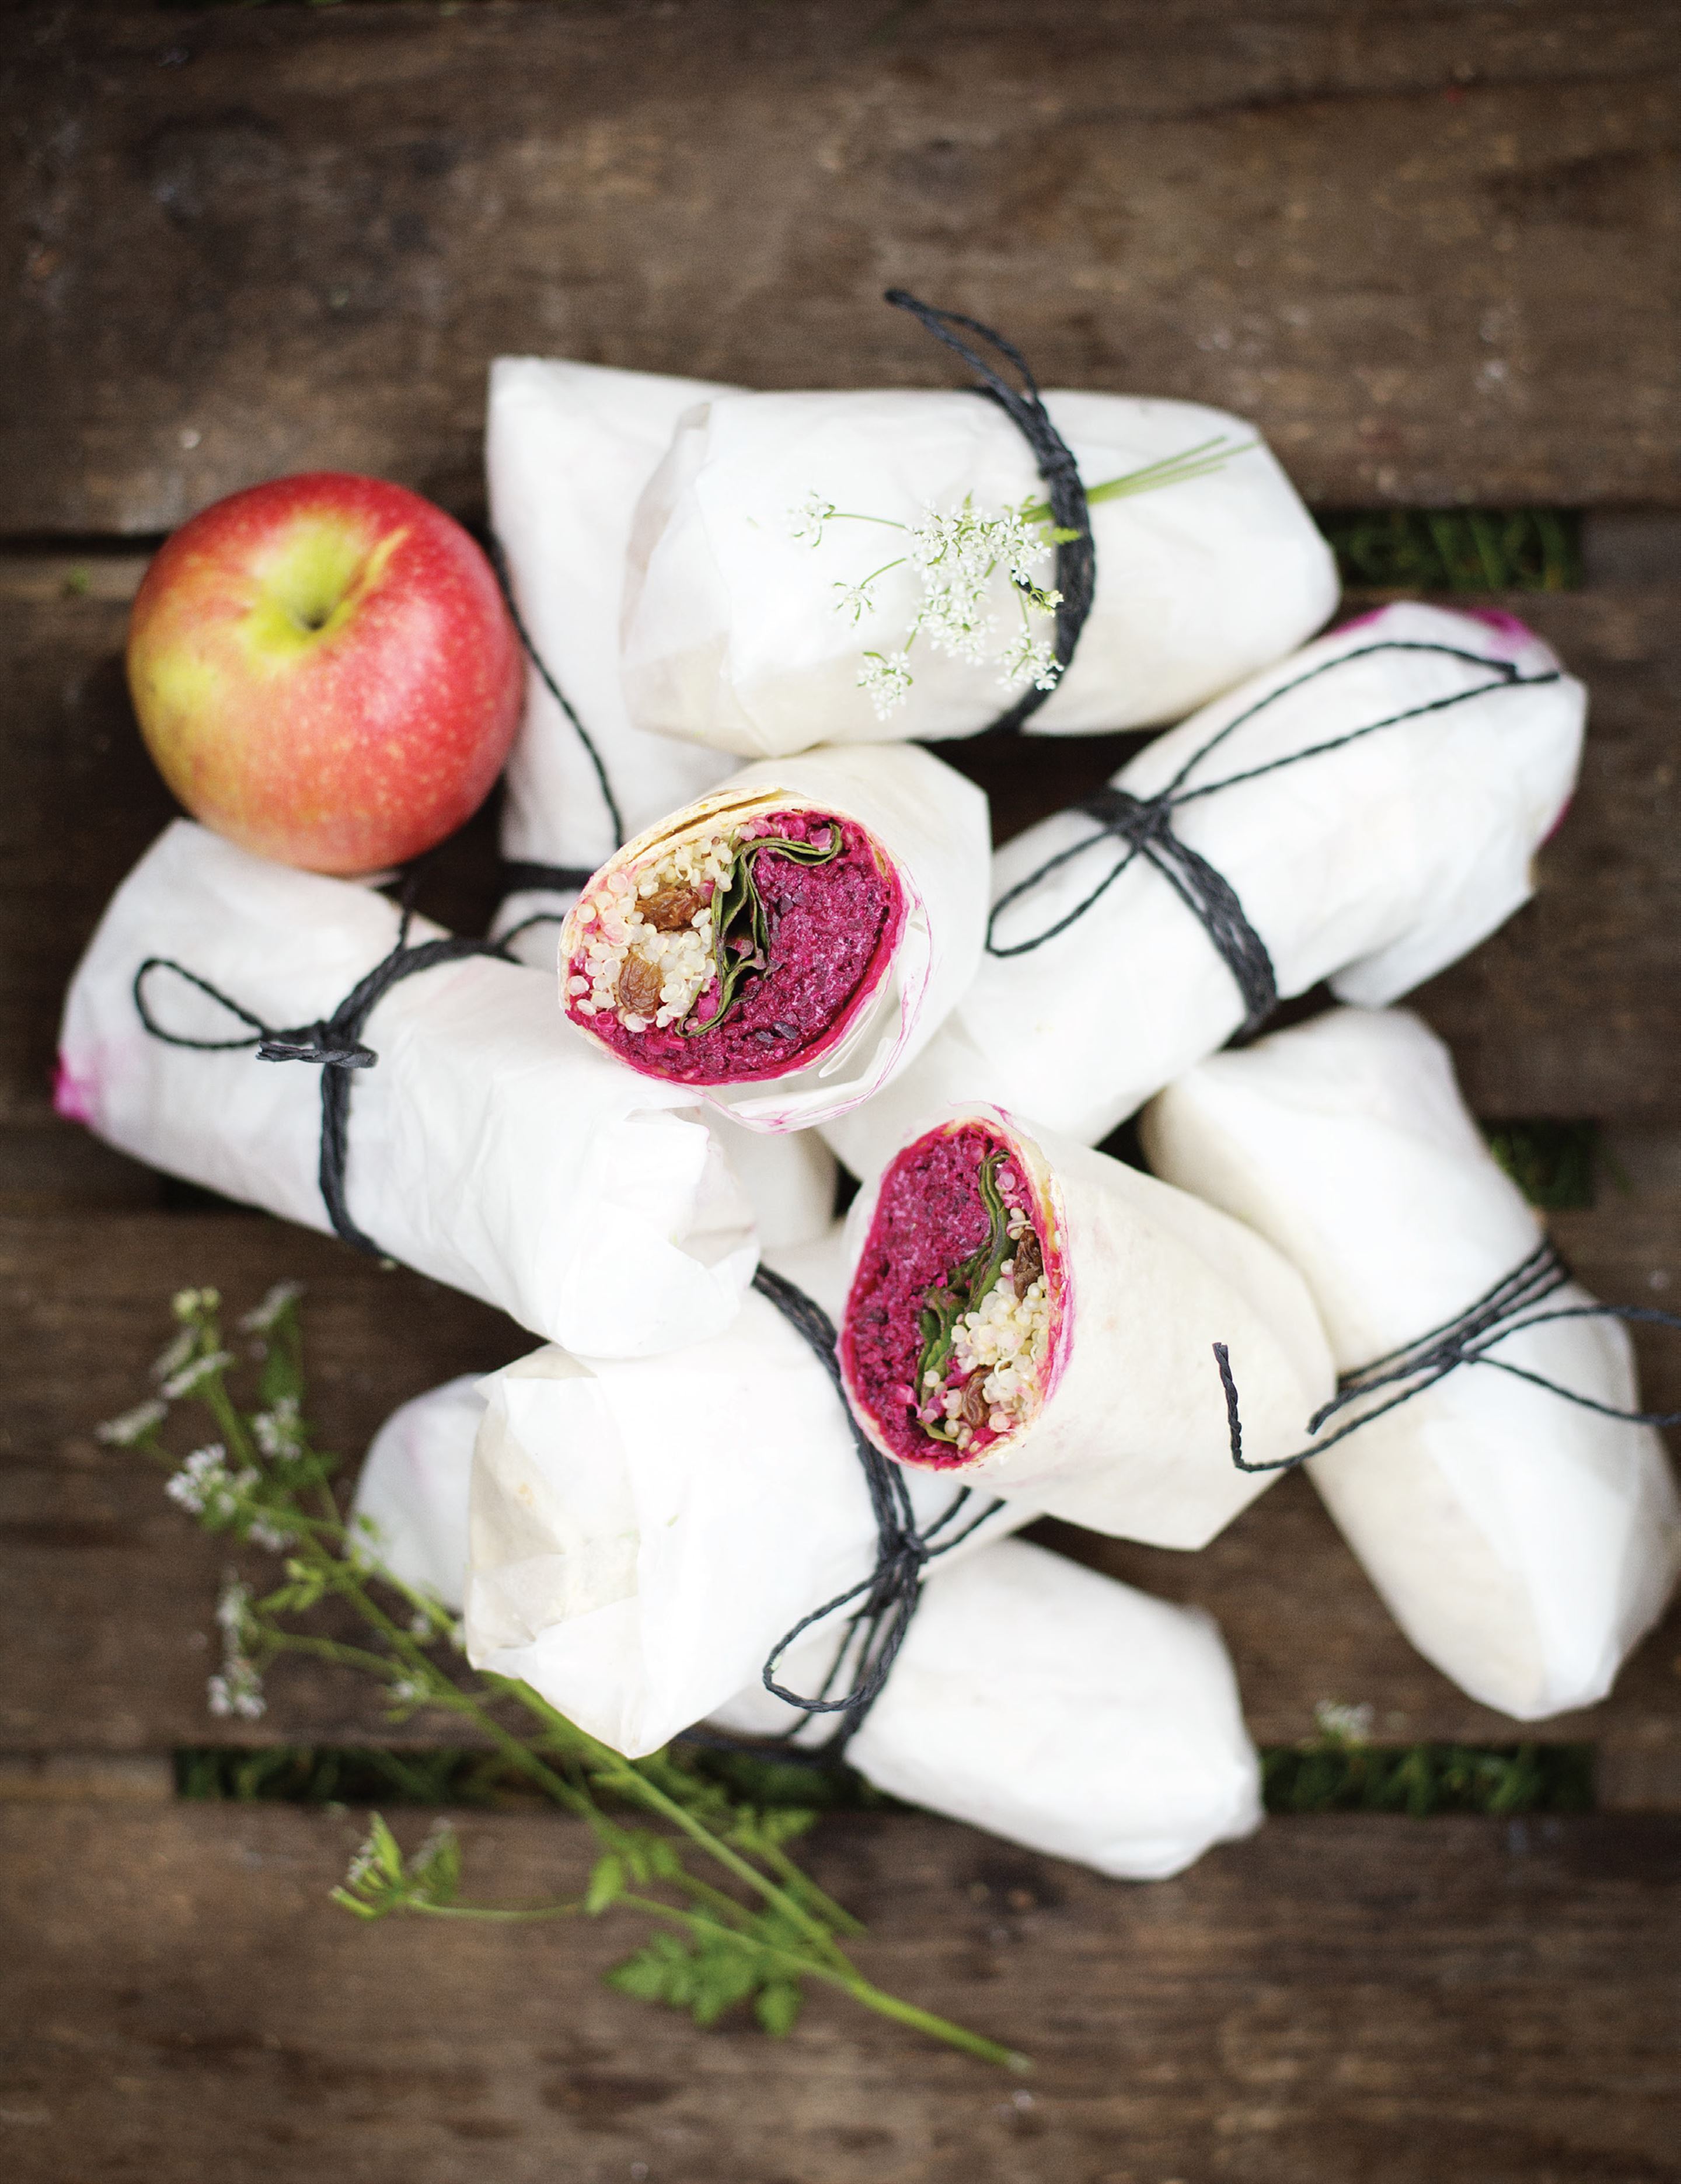 Beetroot, apple and goat’s cheese wraps